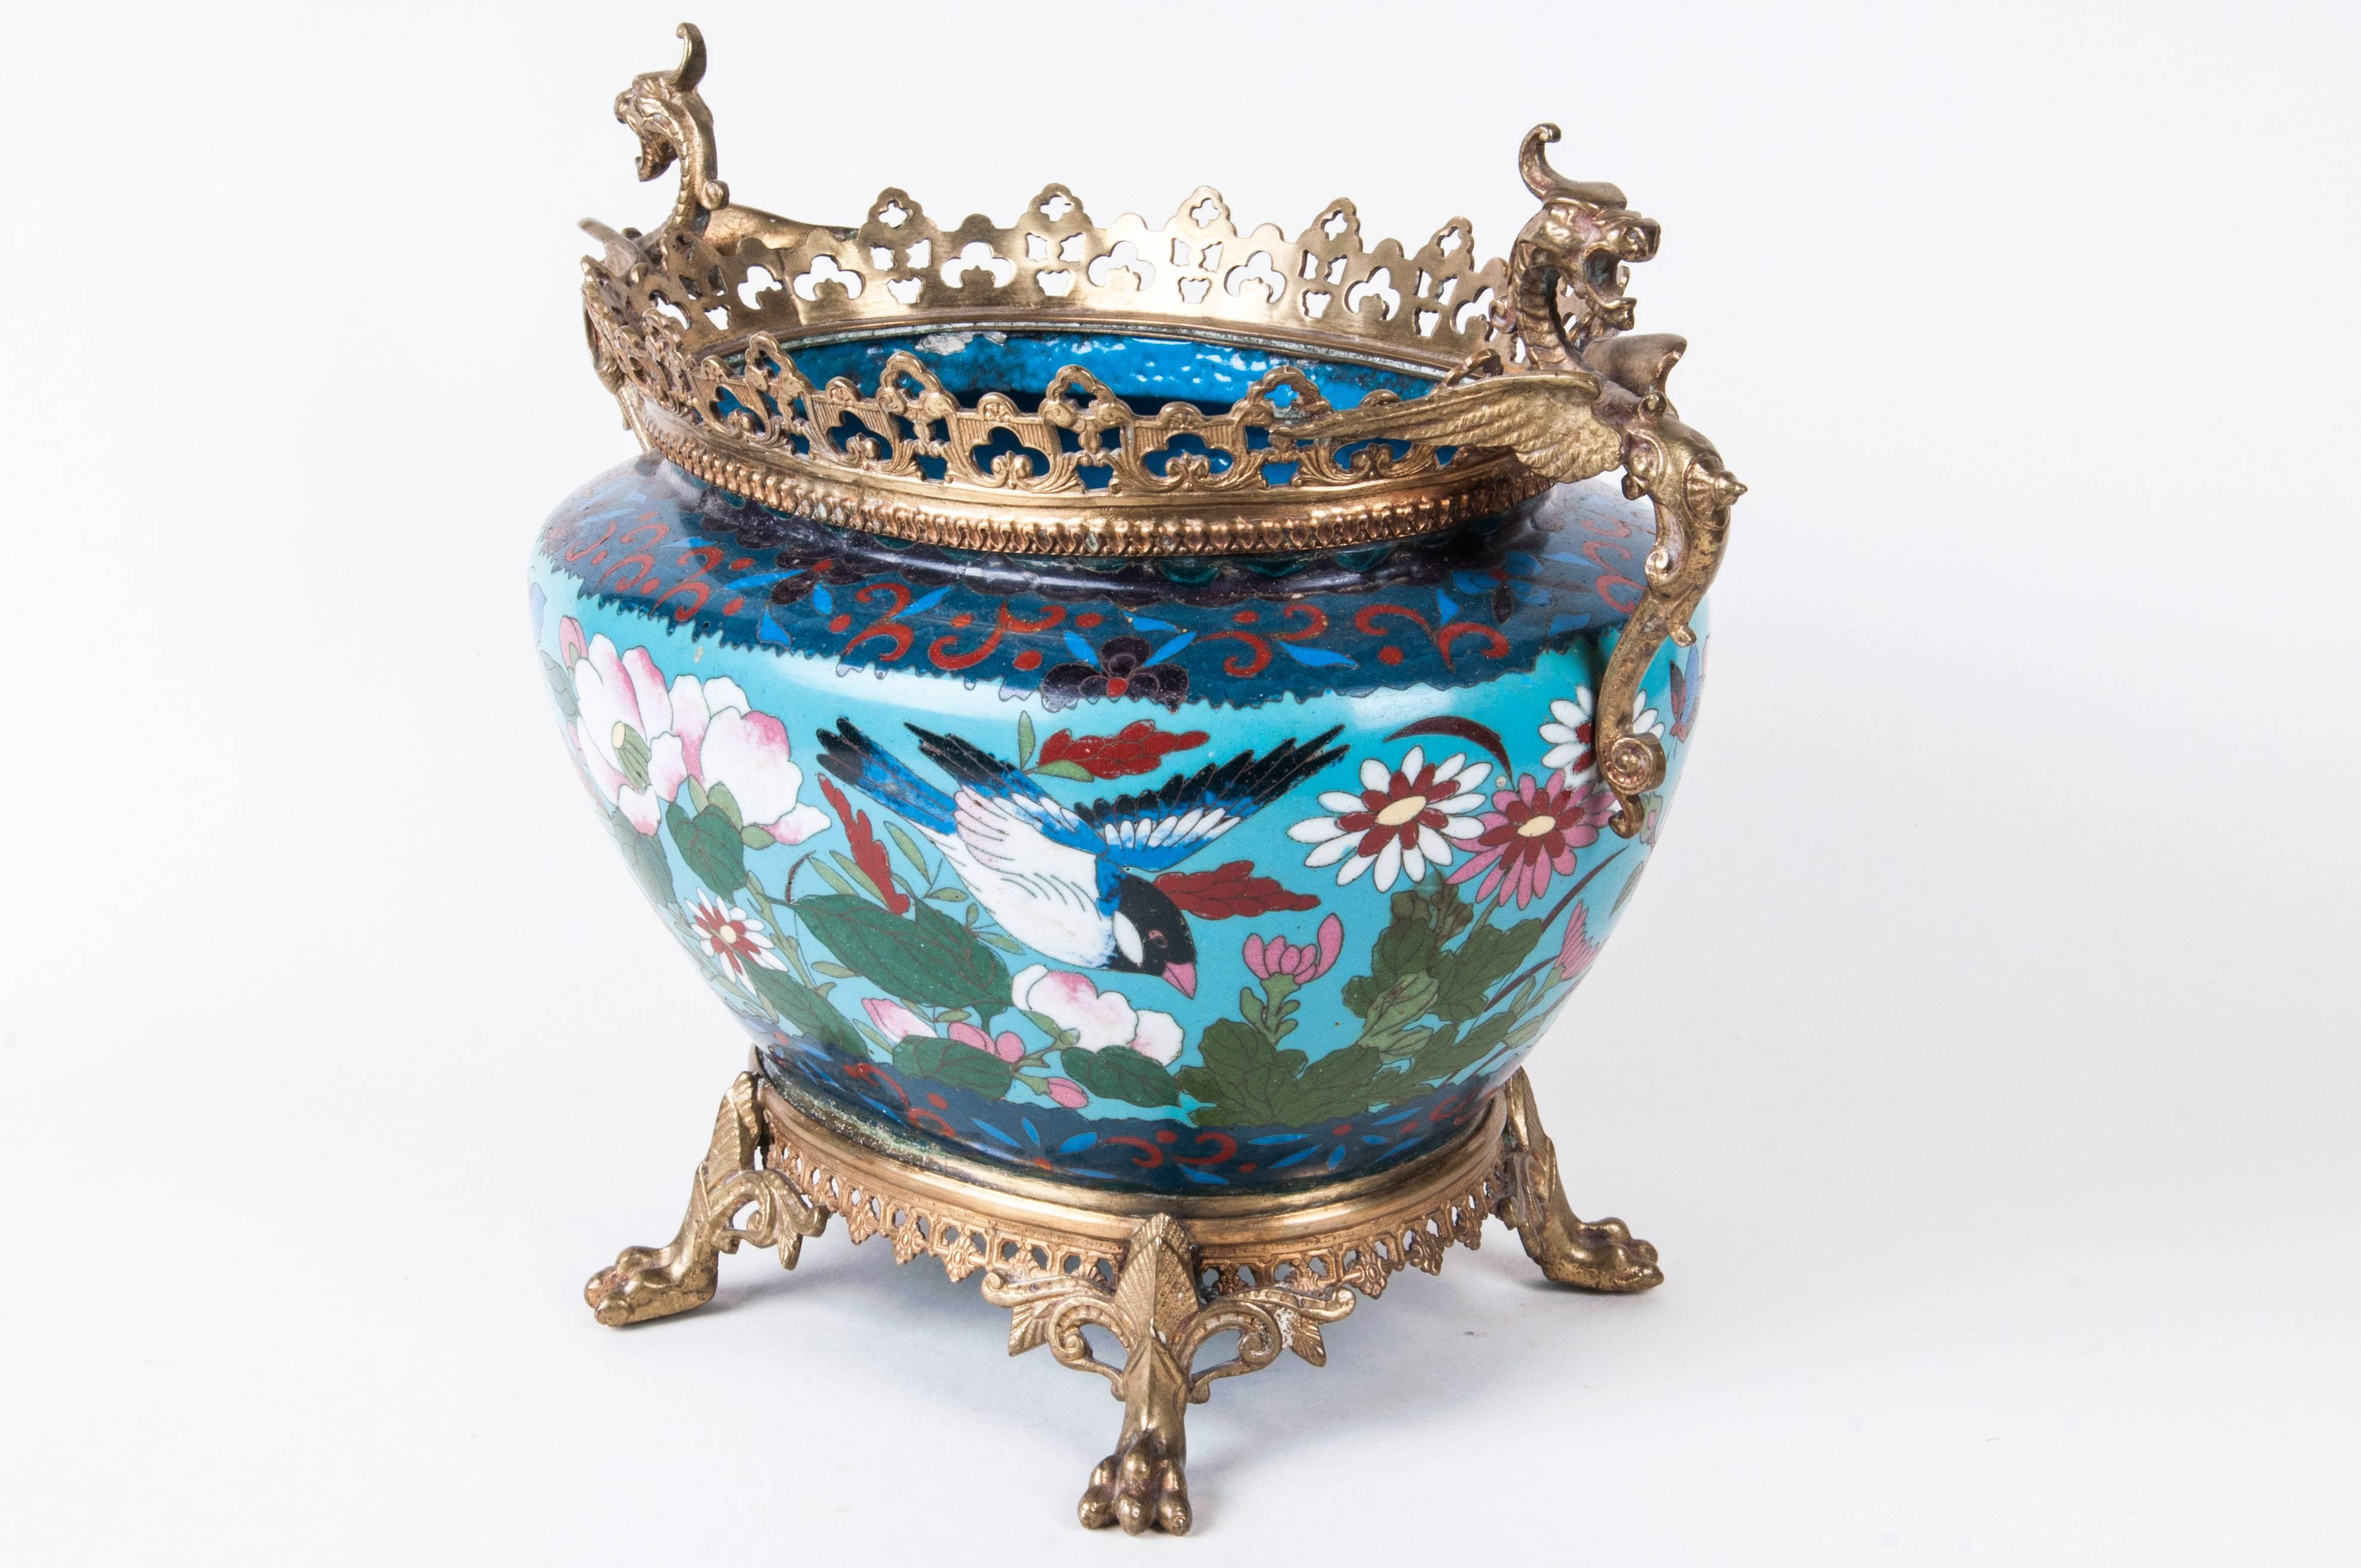 French Japonisme Ormolu-Mounted Japanese Cloisonné Cachepot For Sale 1